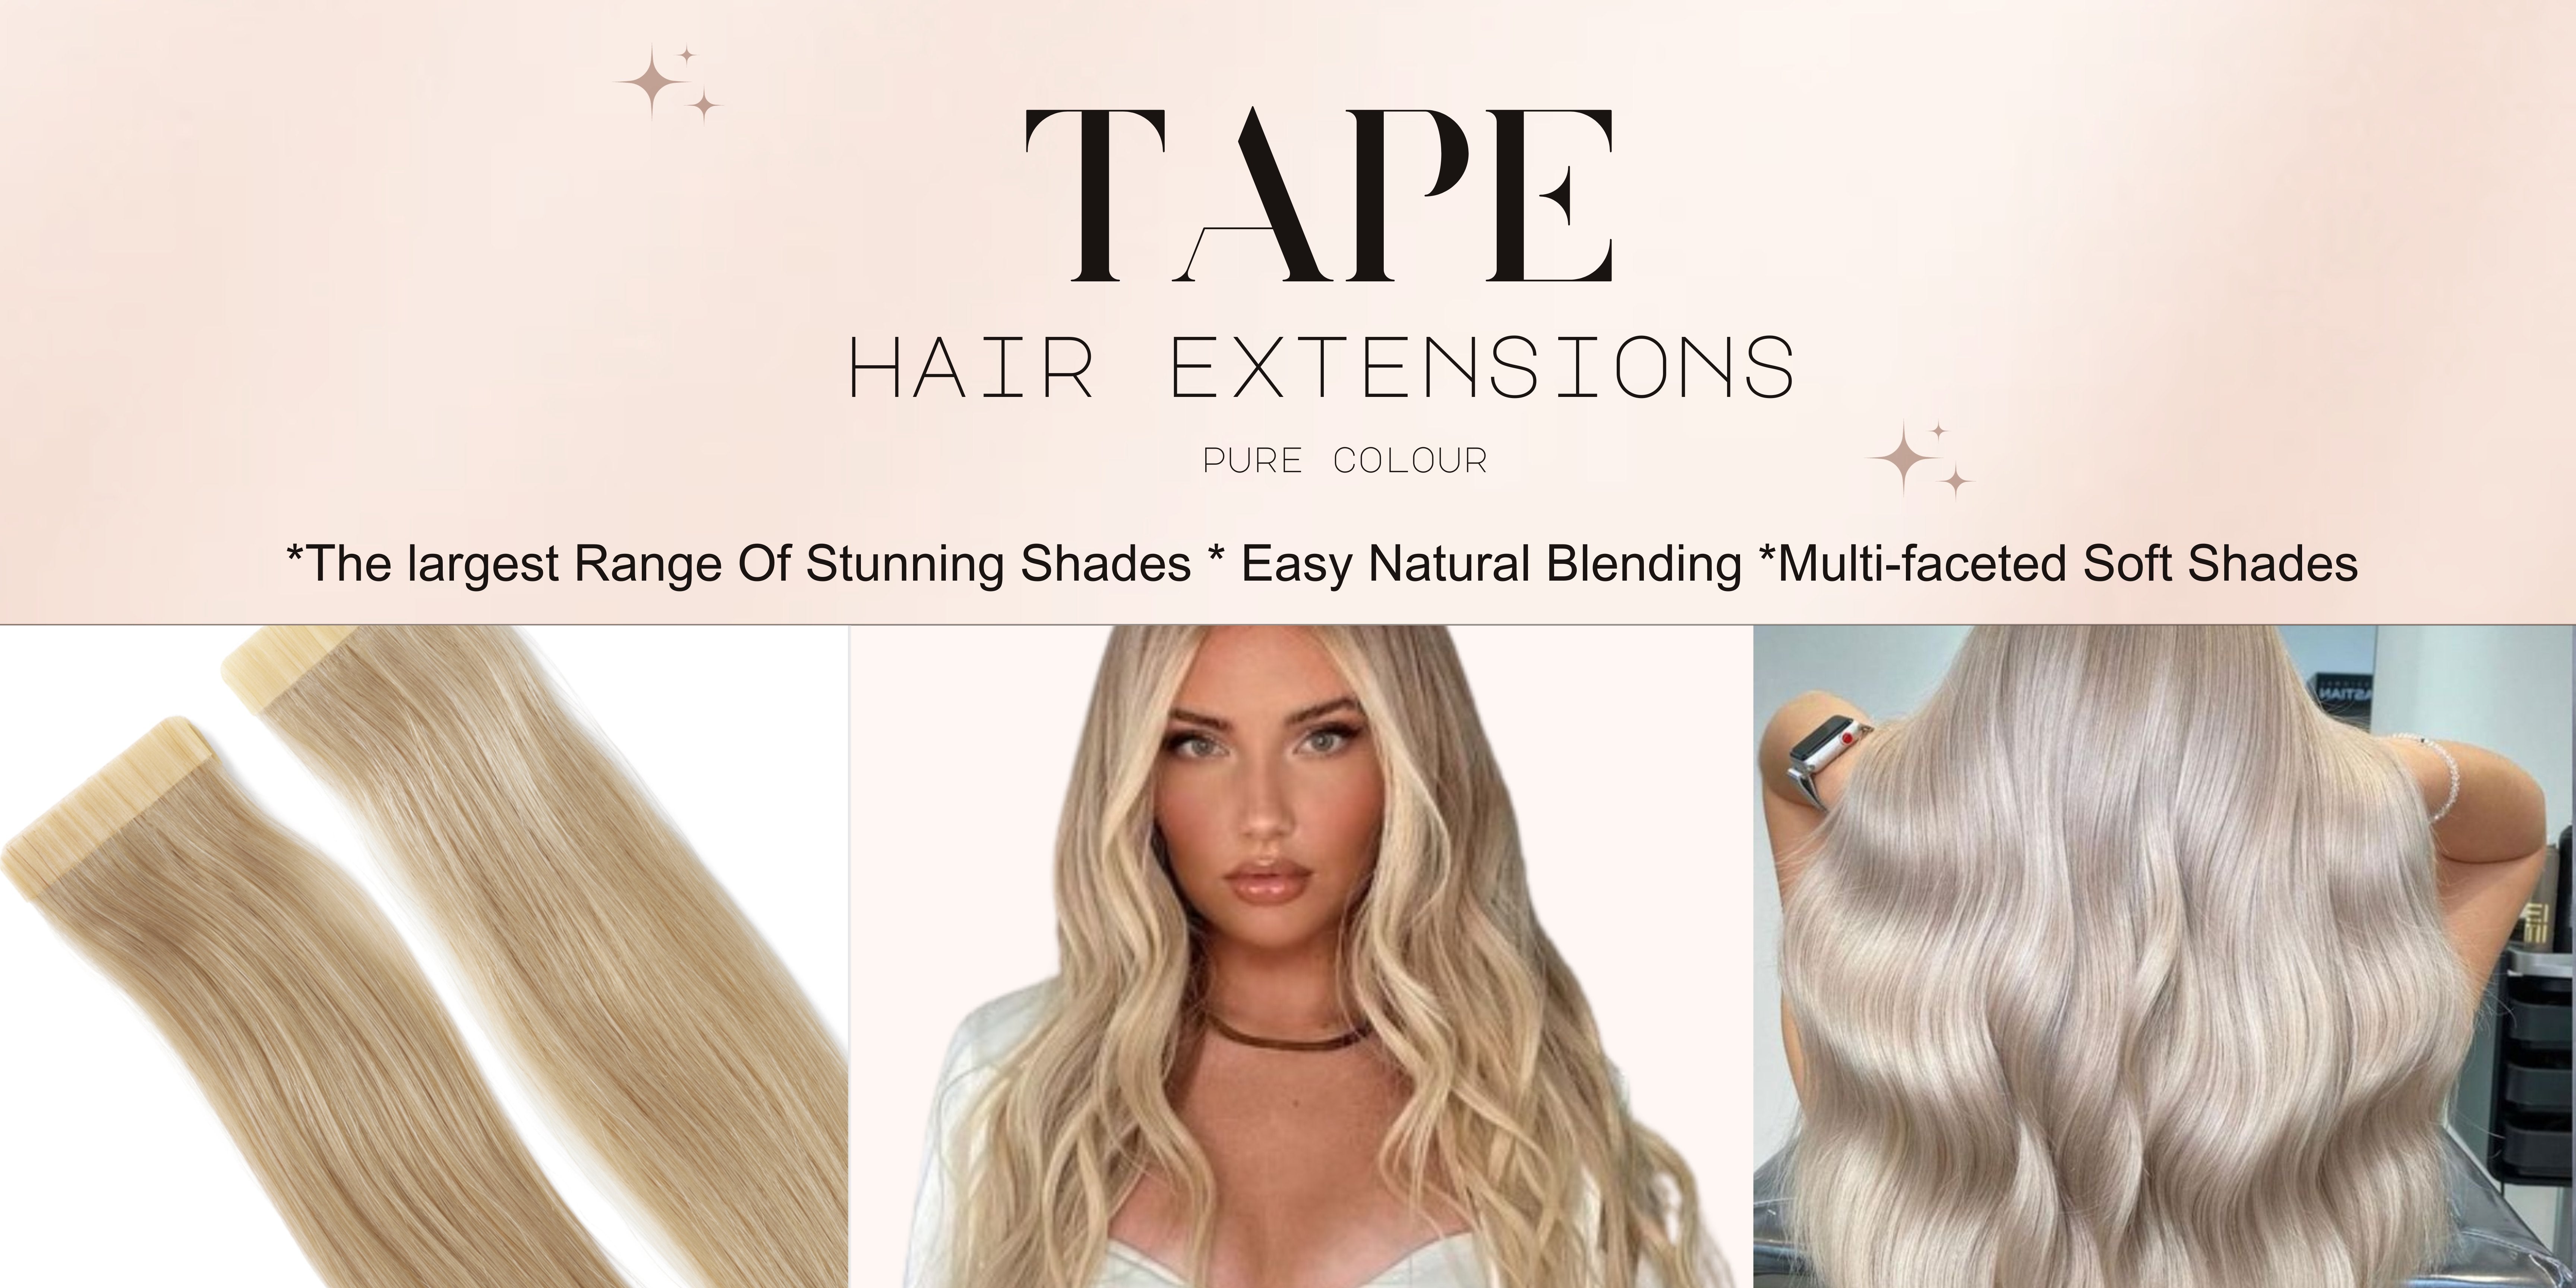 Supplier of Remy Tape hair extensions Australia 